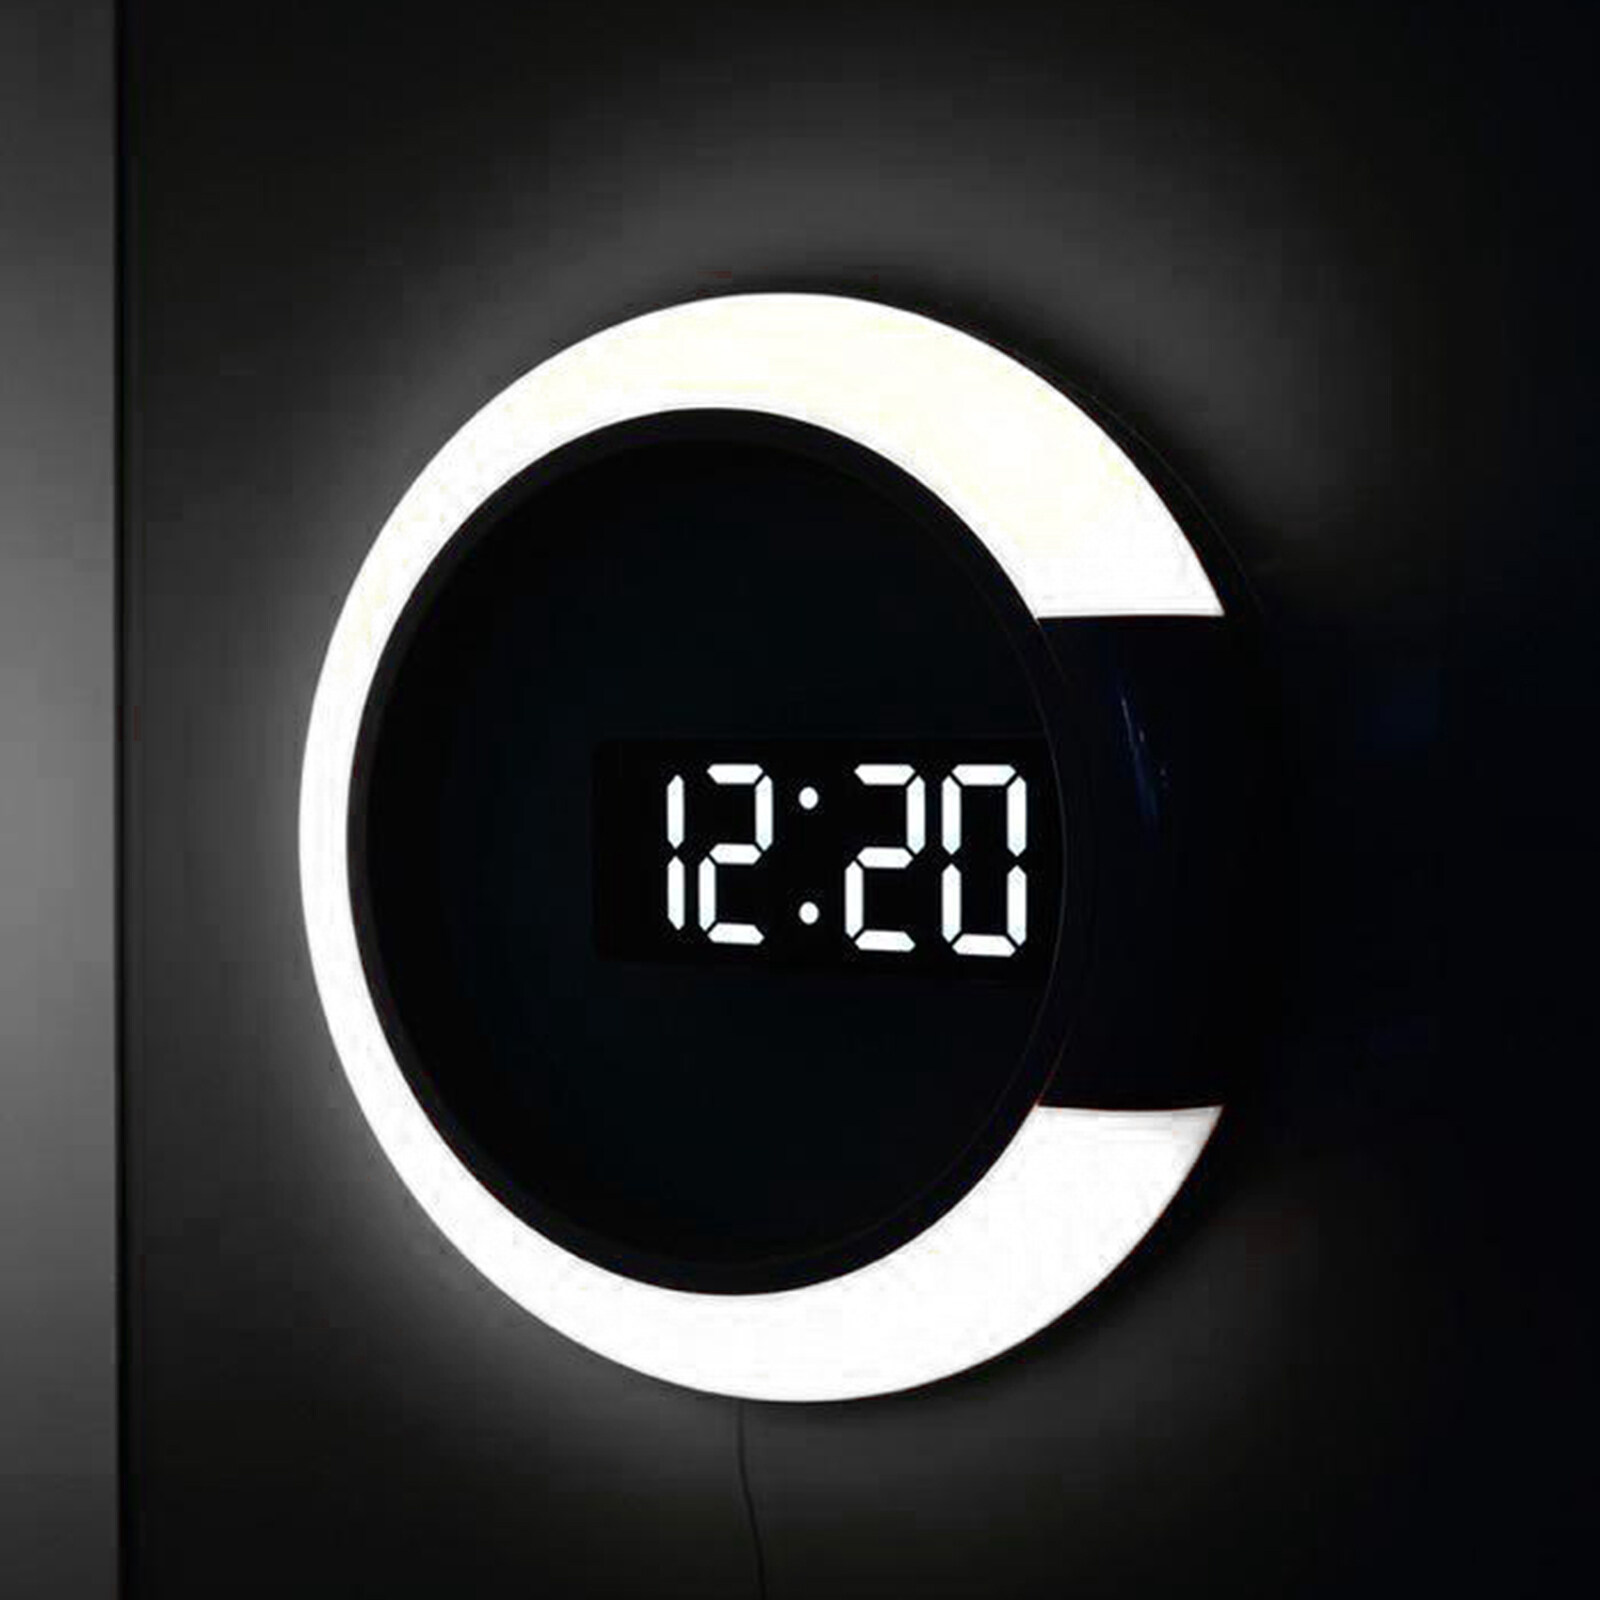 Blesiya Digital Office Home Mirror 12 LED Wall Clock Remote Control Snooze Function 2